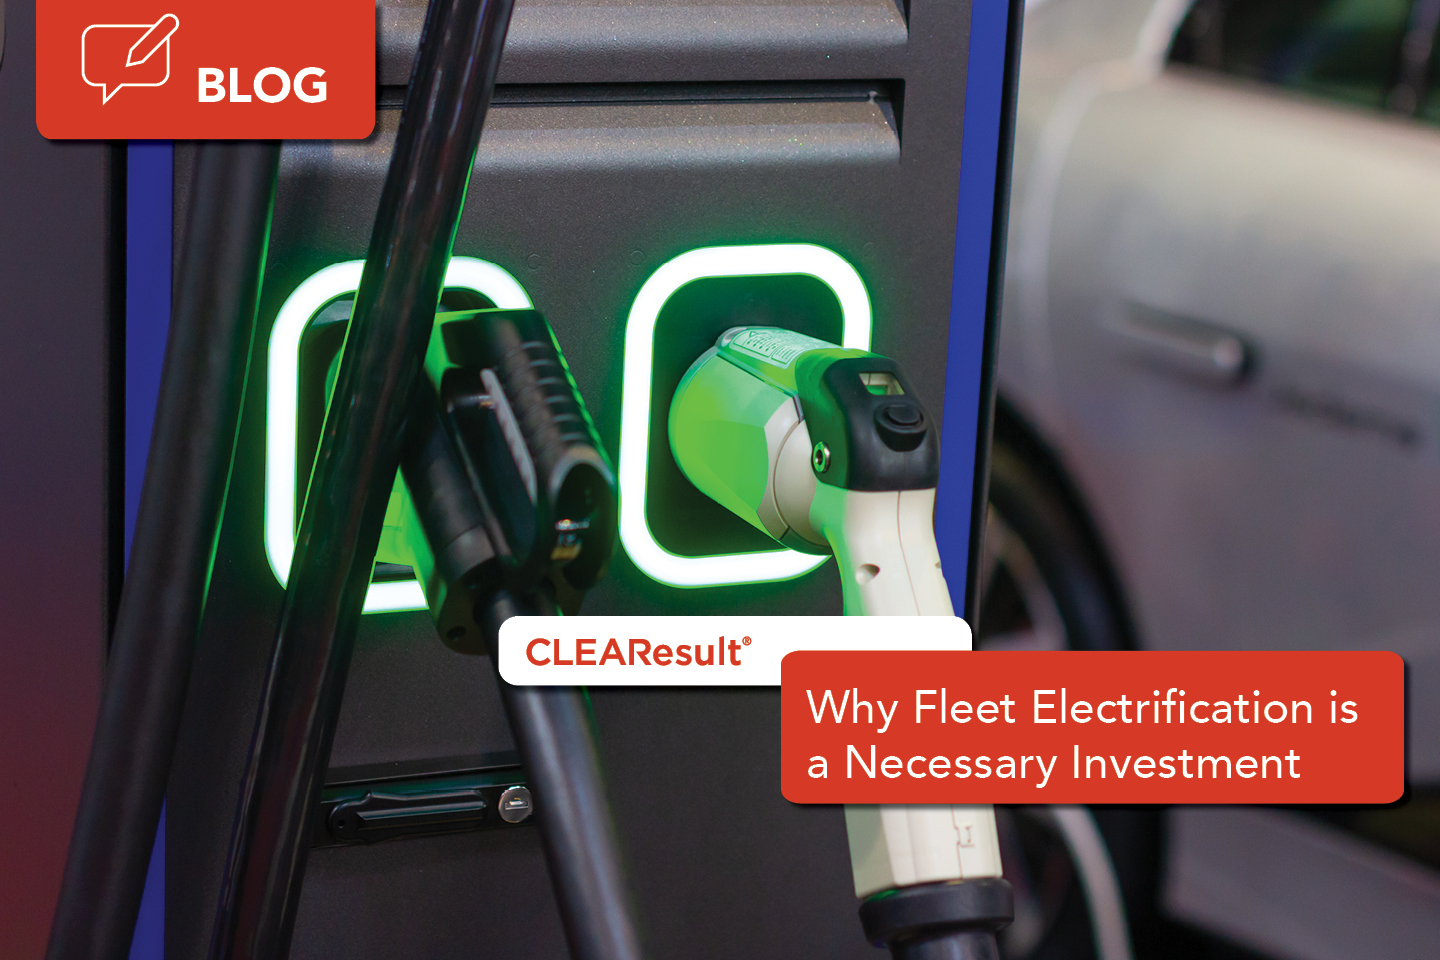 Why Fleet Electrification is a Necessary Investment